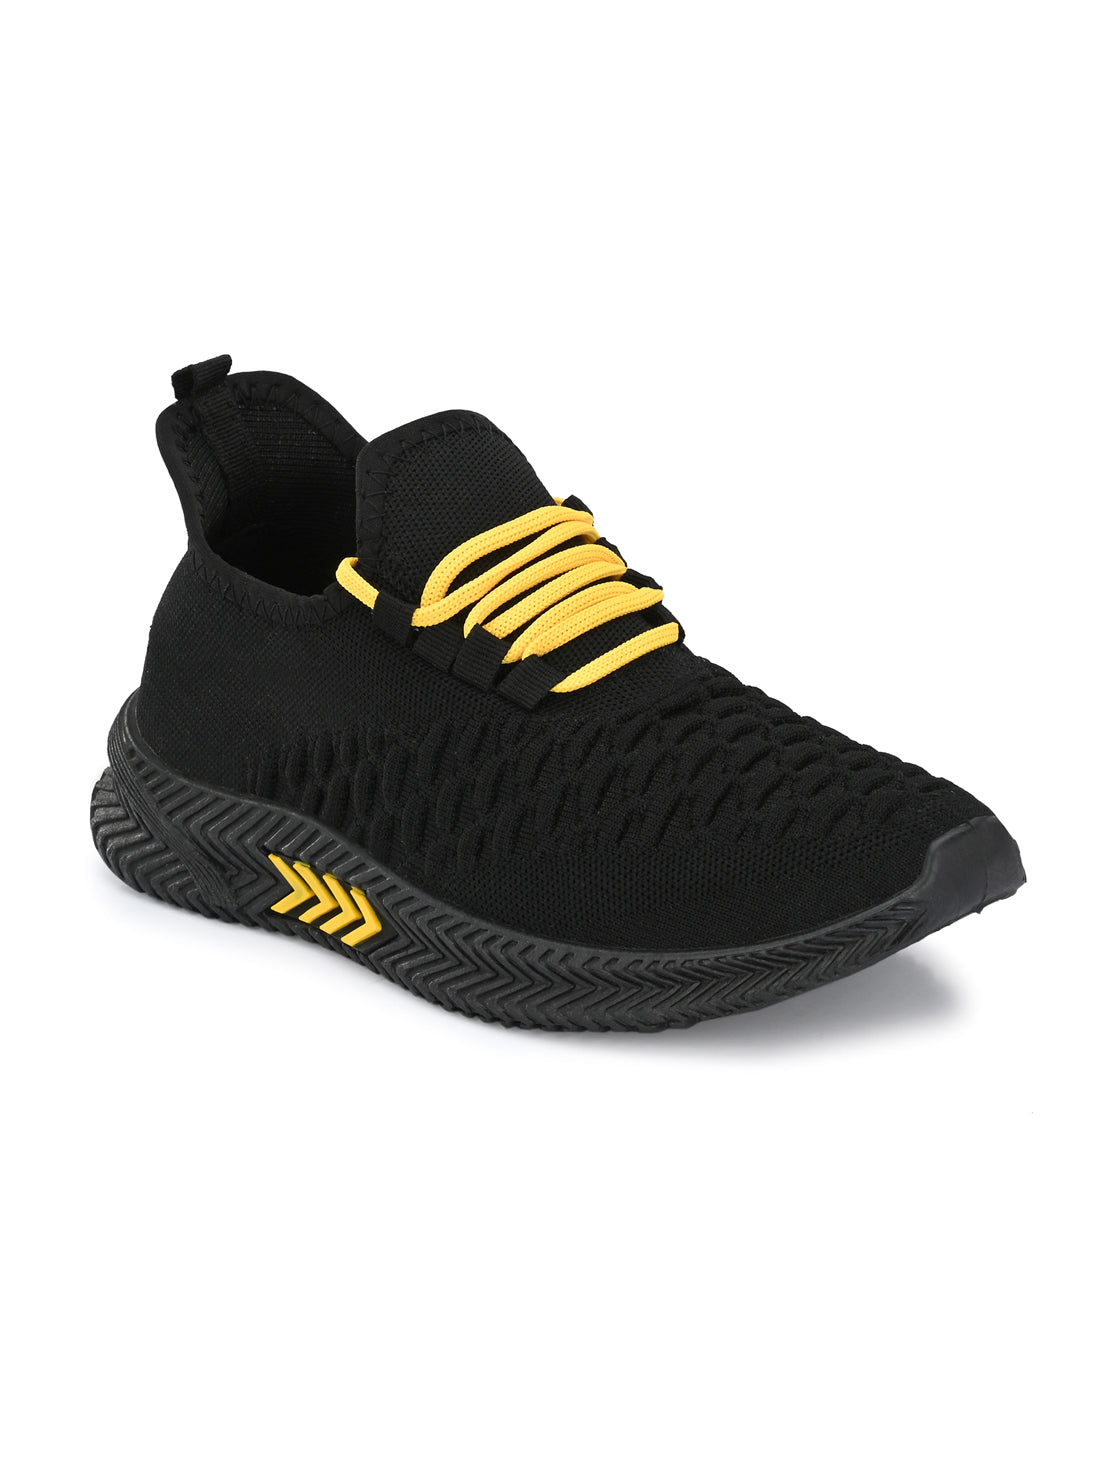 Hirolas® Men's Athleisure Black Knitted Lace-Up Sports Shoes